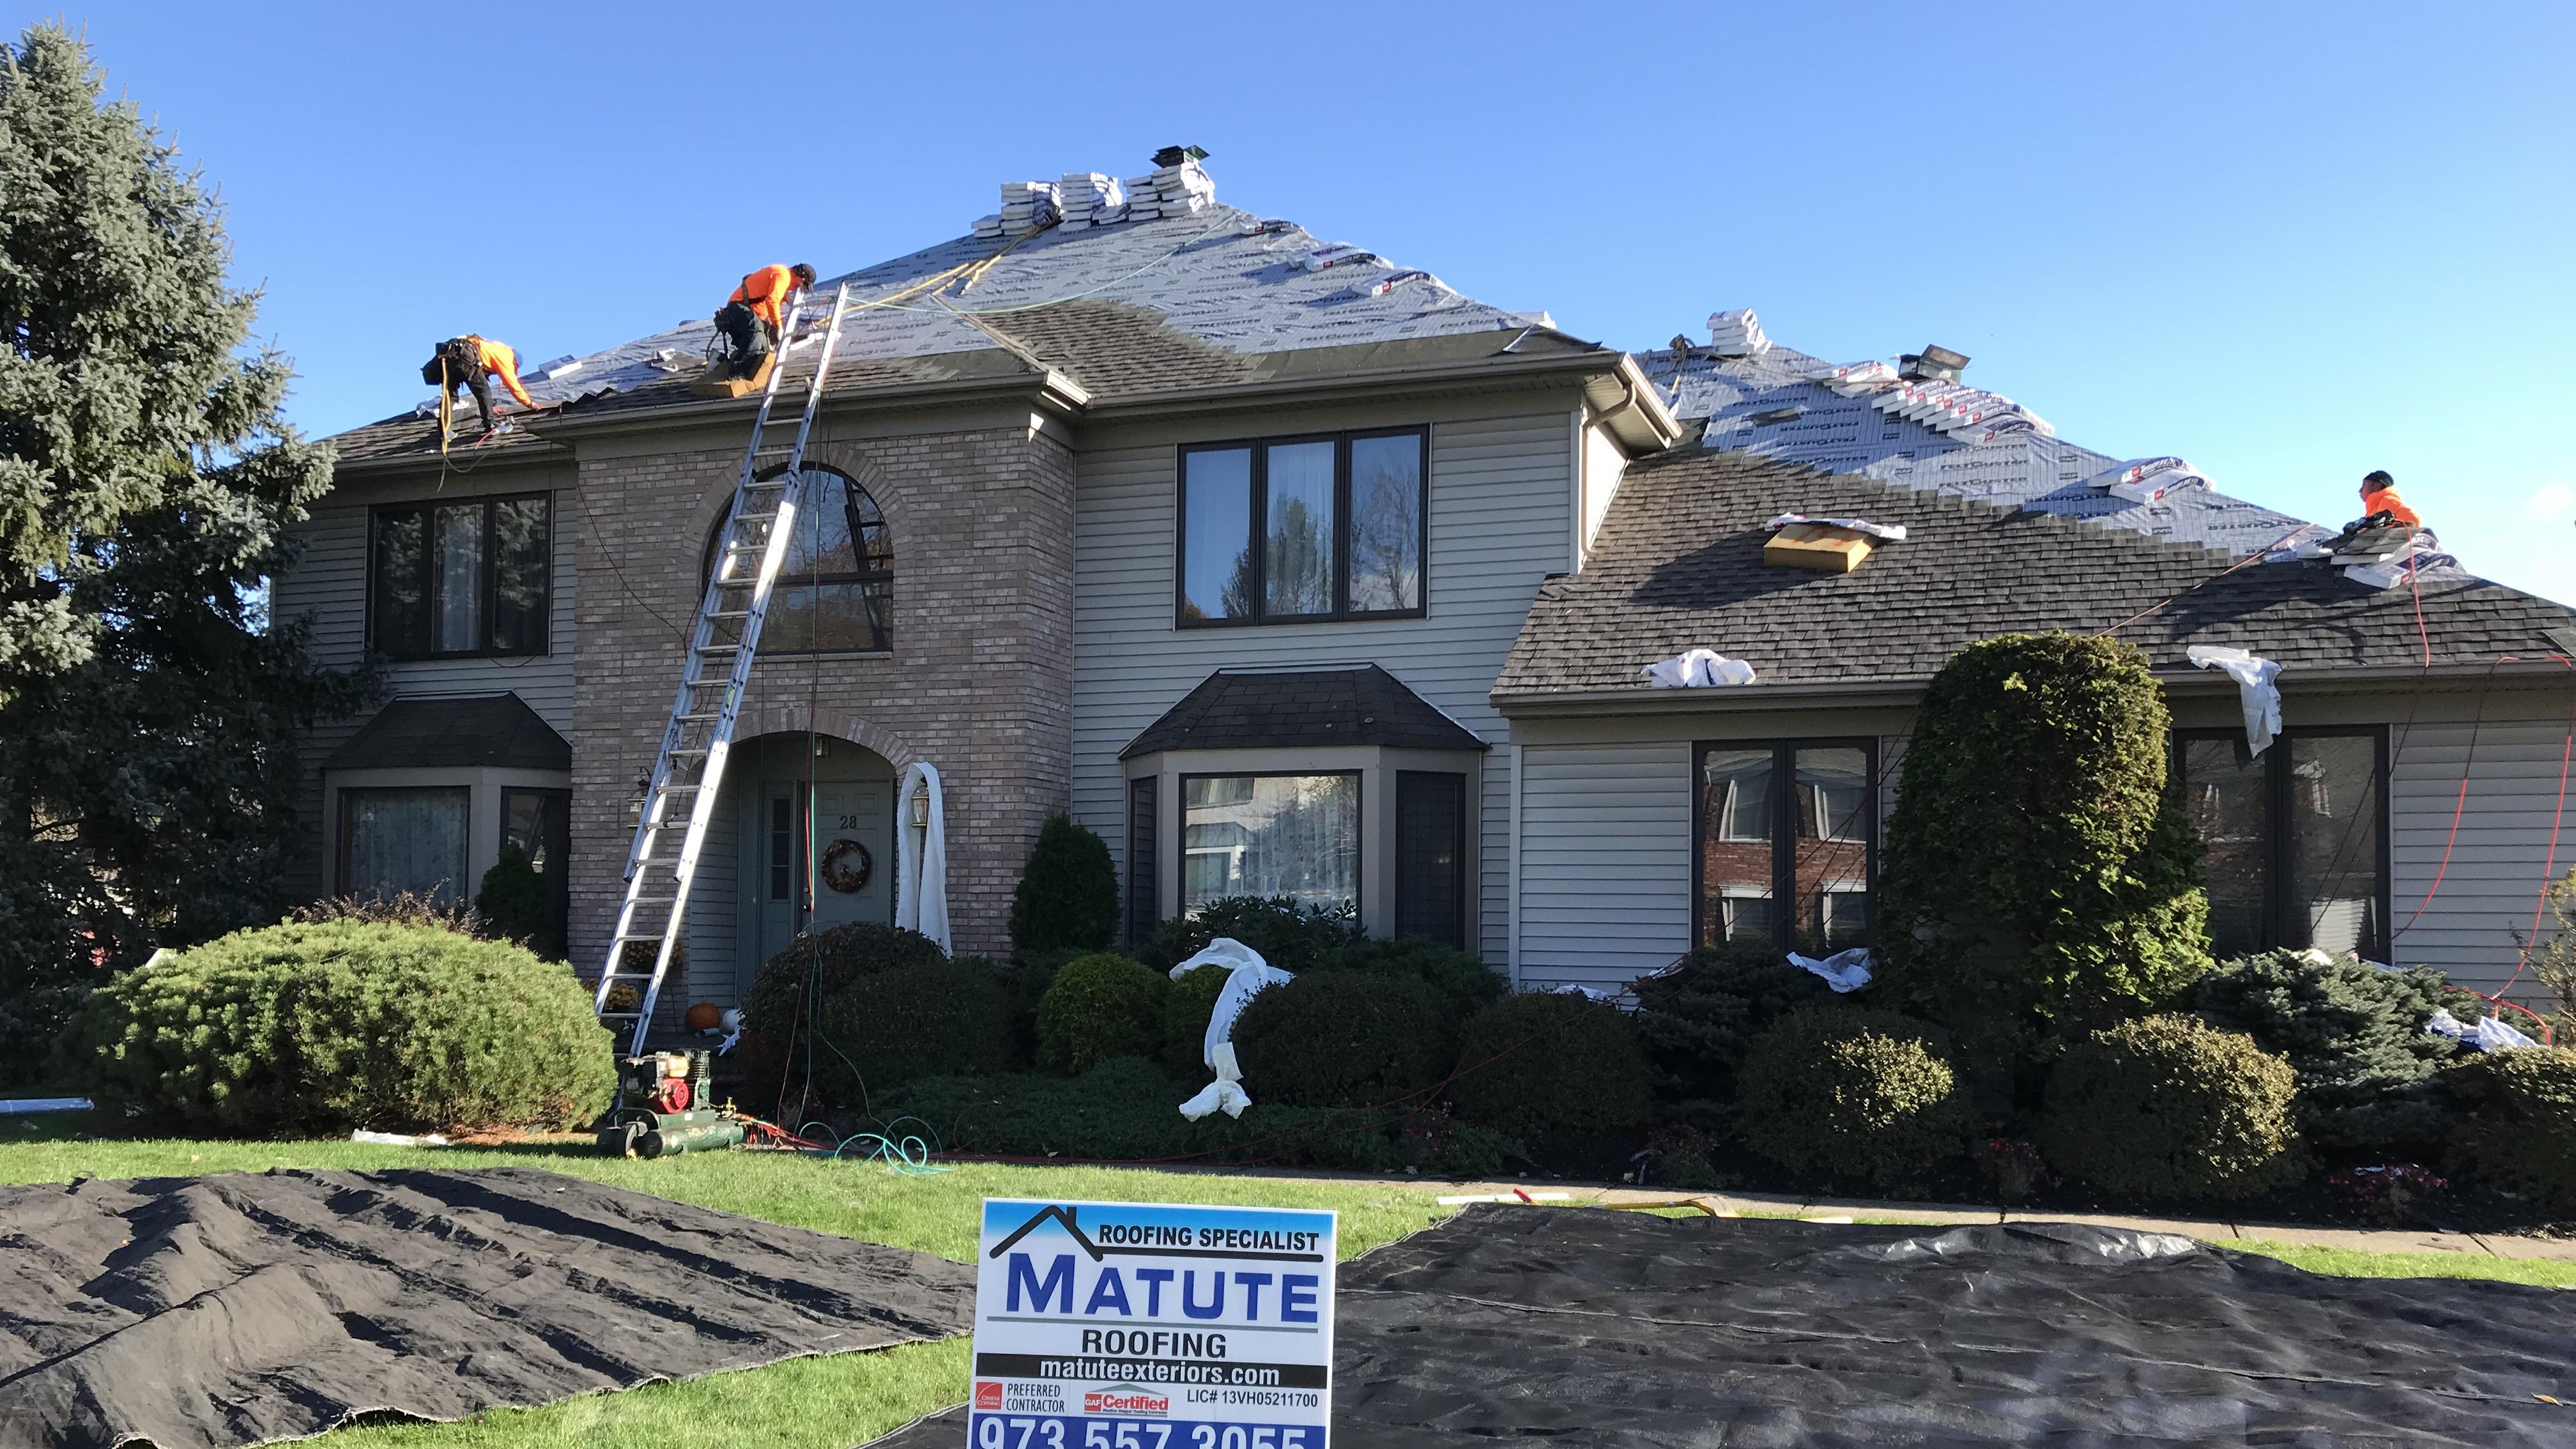 Matute Roofing/Roofing                                                                                                                                                                                                 